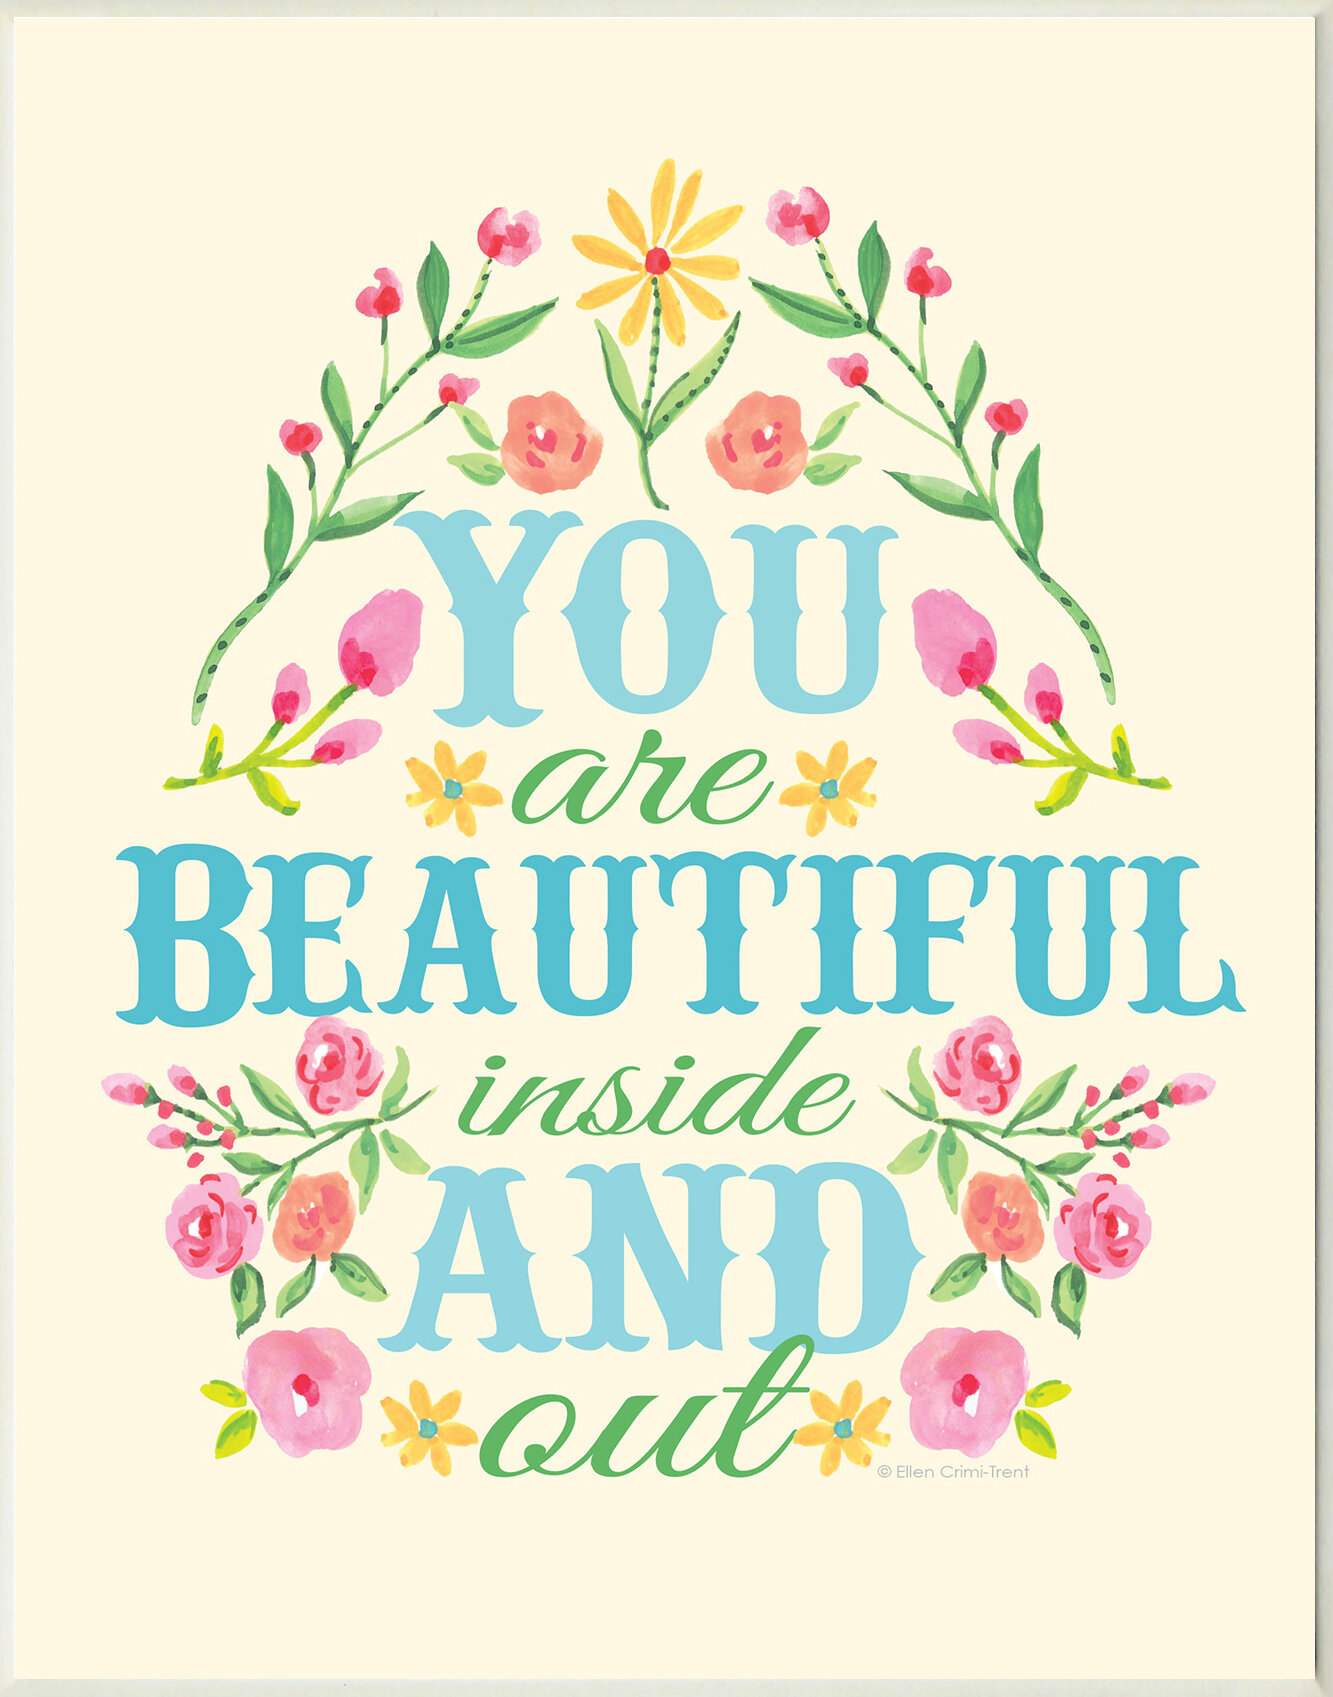 you are beautiful inside and out